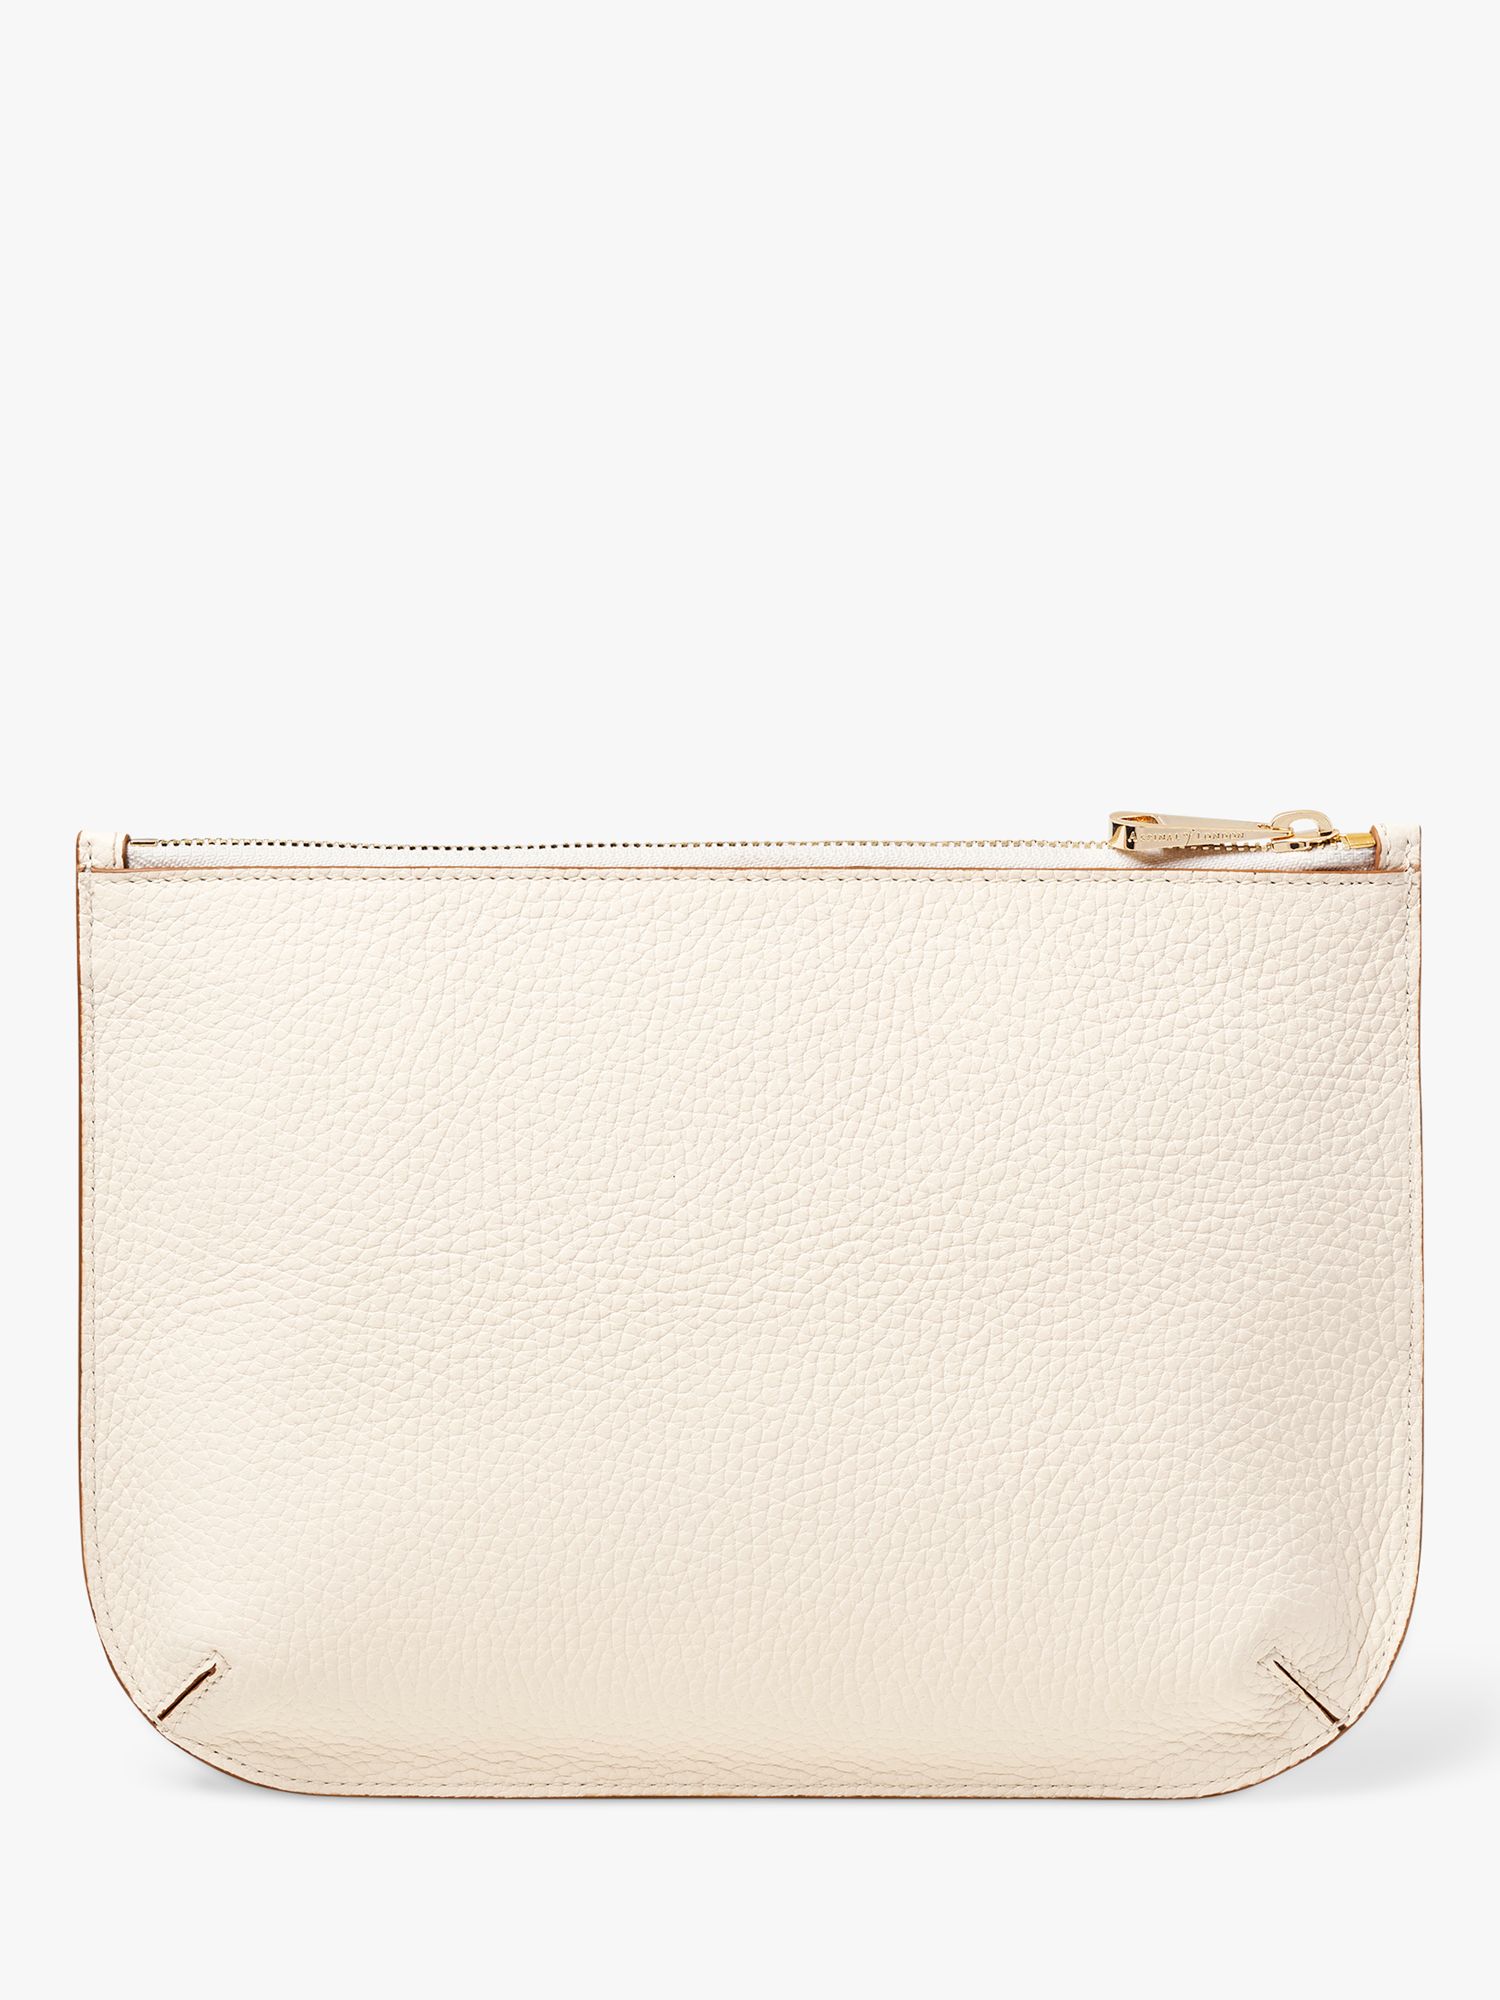 Aspinal of London Large Ella Pebble Grain Leather Pouch, Ivory